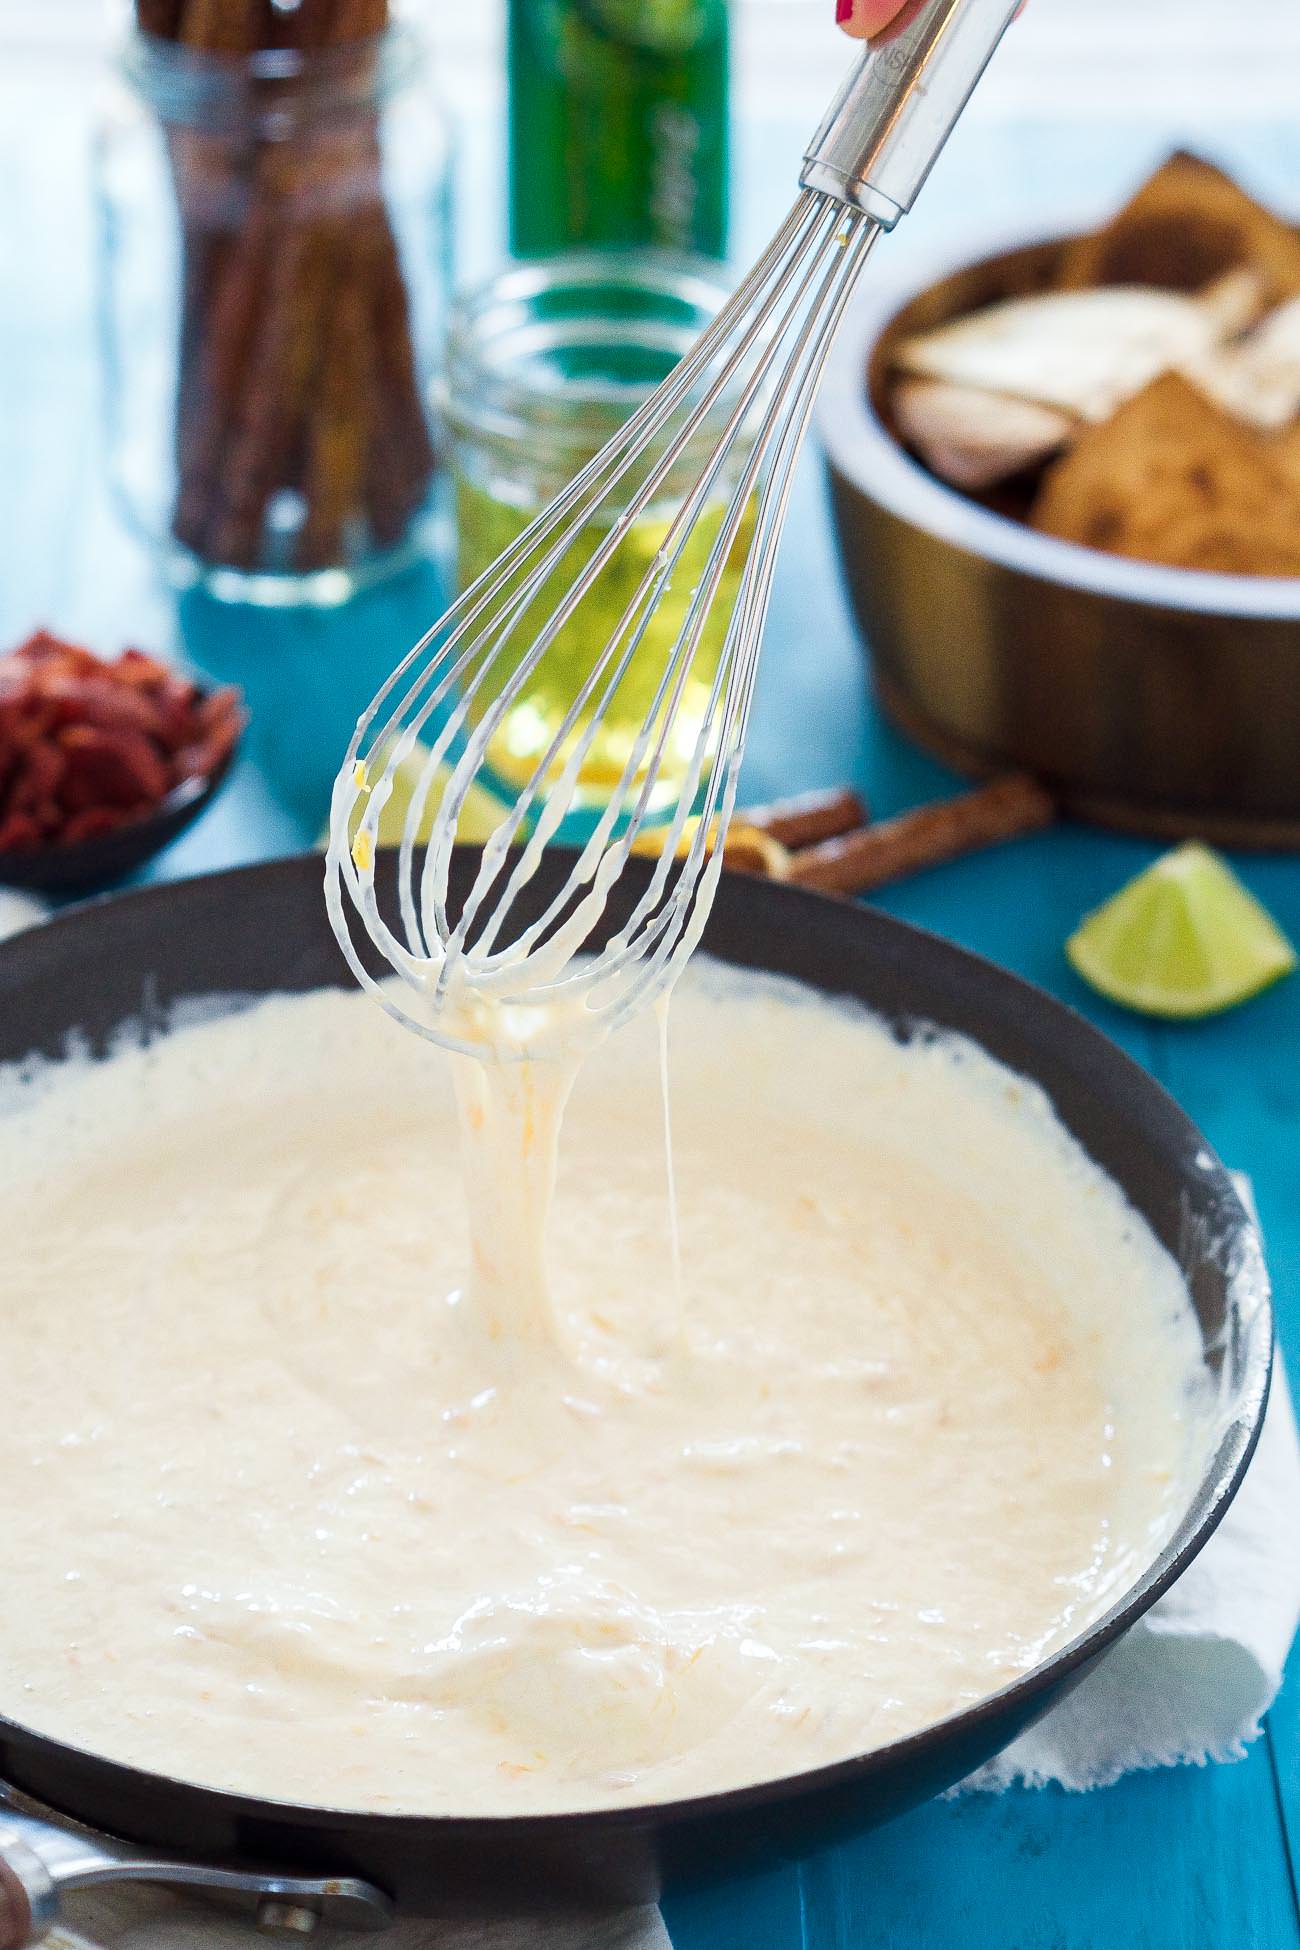 Sriracha Bacon Beer Cheese Dip is an irresistible, 4 ingredient appetizer that is creamy, cheesy, loaded with flavorful toppings and only takes only 15 minutes to make! It will be the hit at any party!